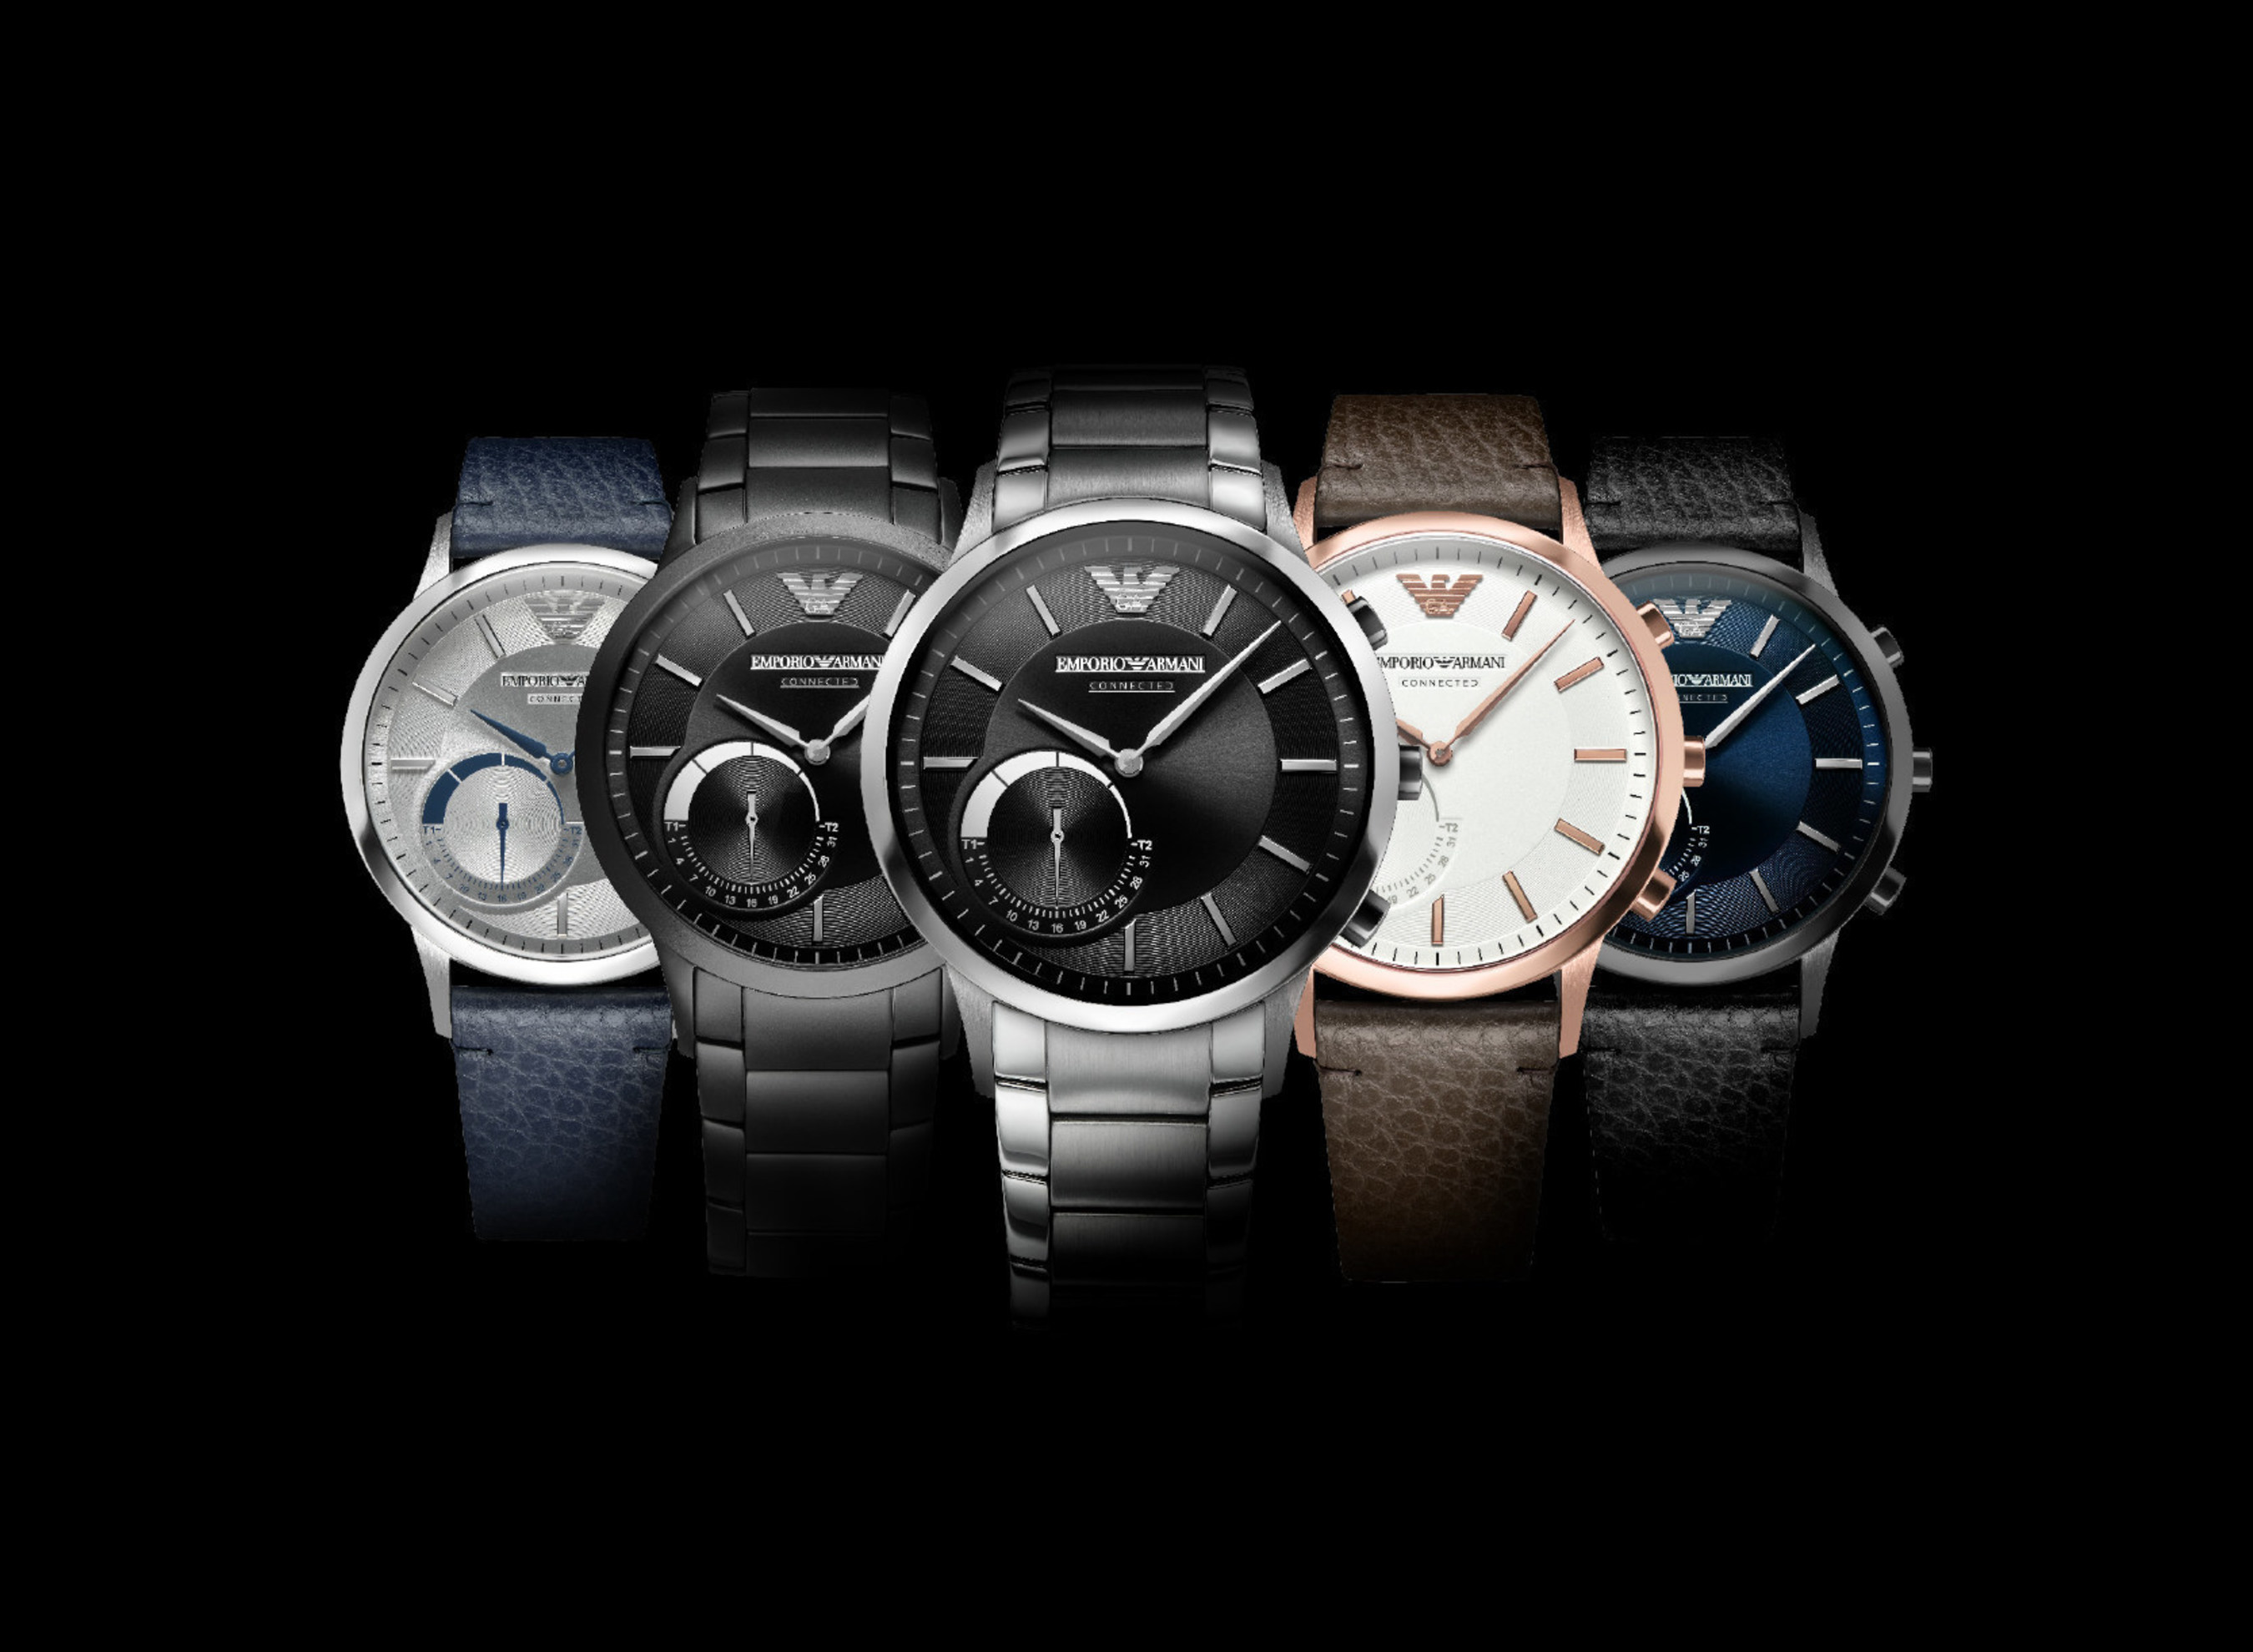 The Emporio Armani Connected Hybrid Smartwatch Collection